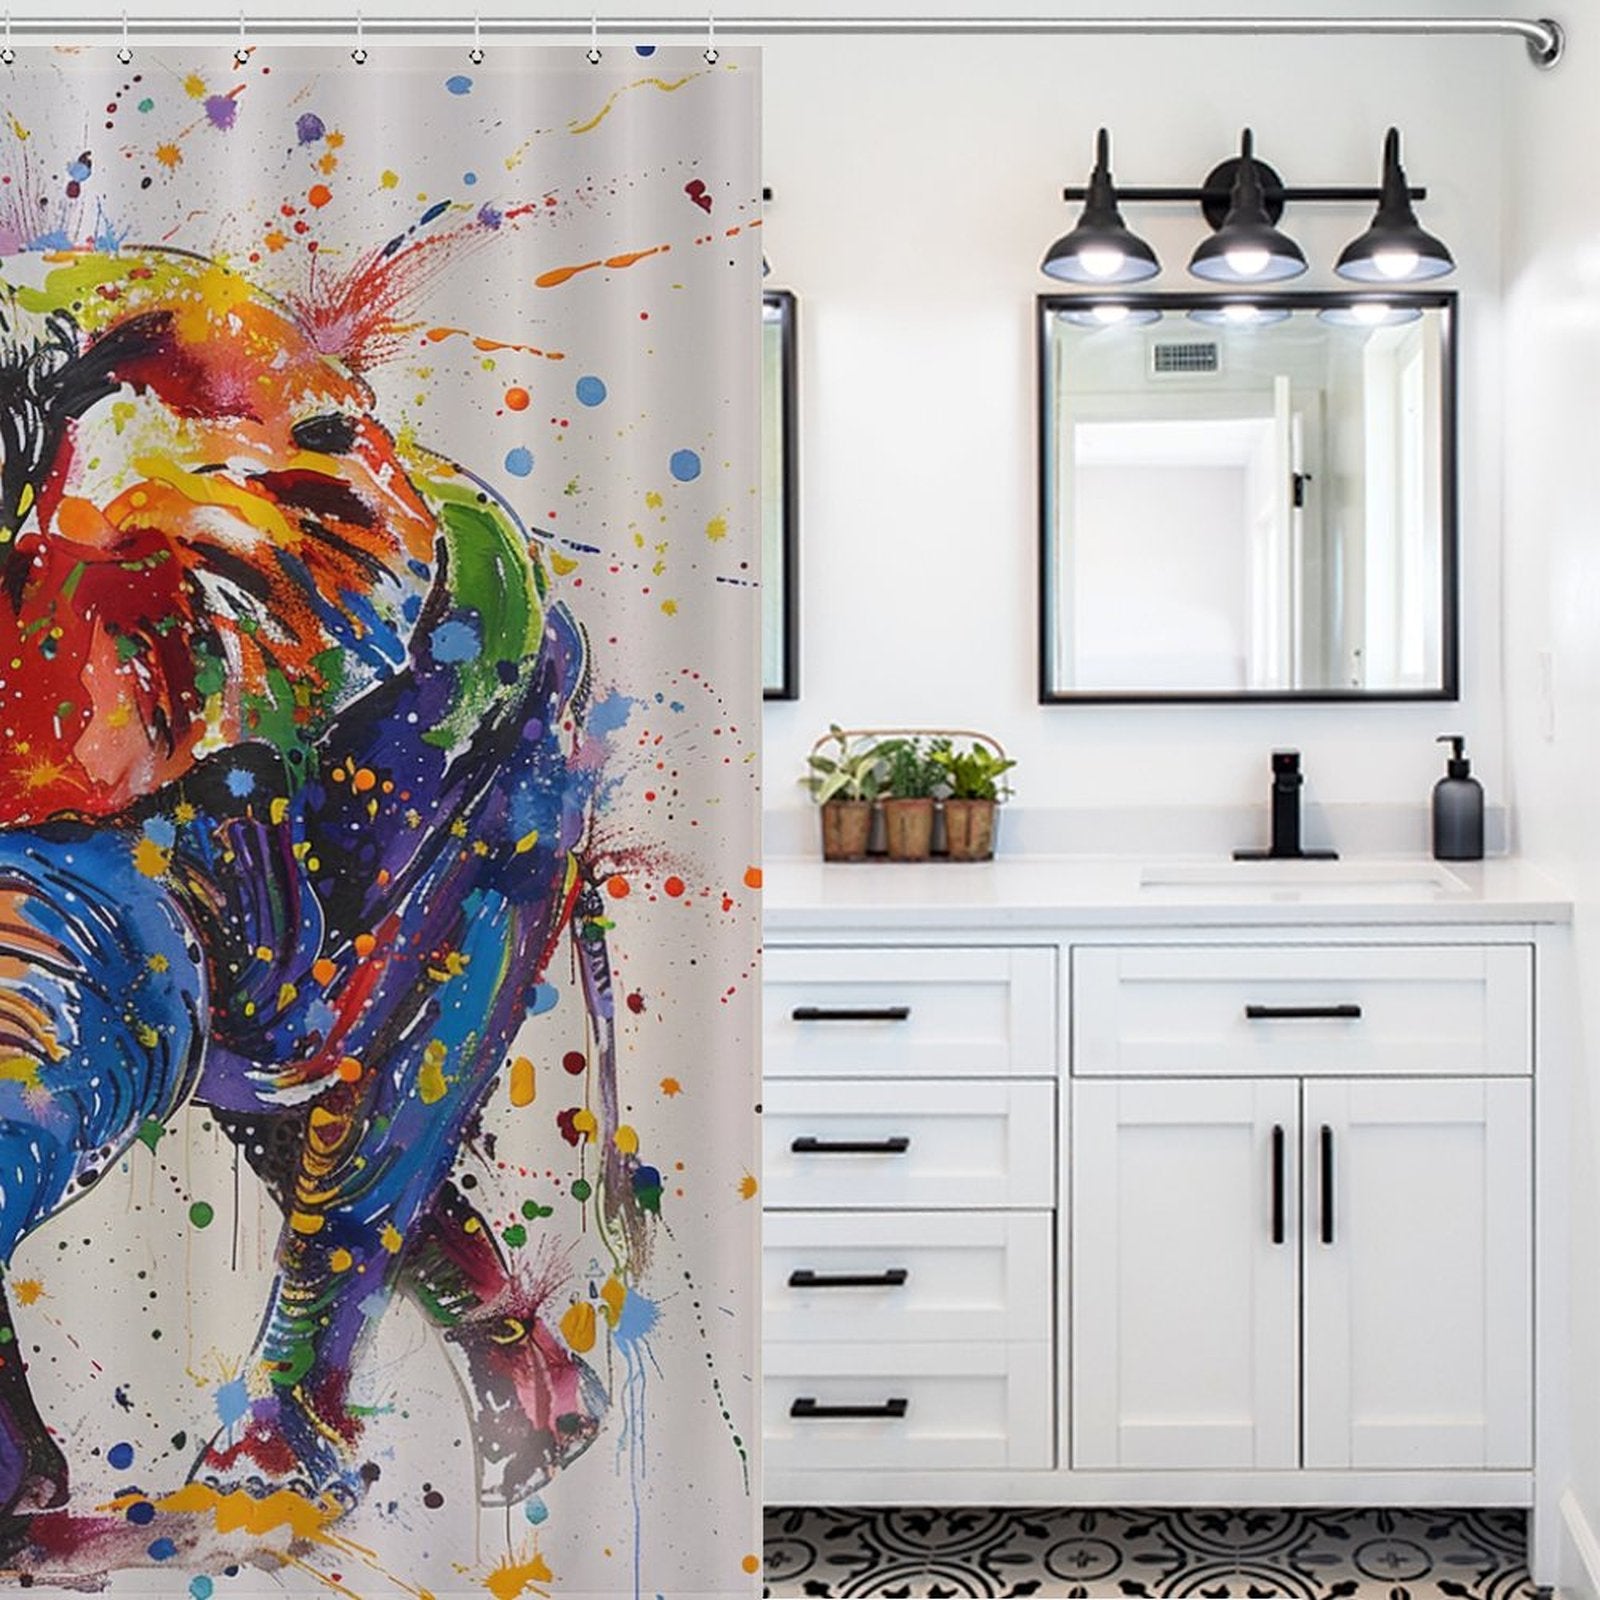 A bathroom with white cabinetry, black fixtures, and an Artistic Painting Happy Elephant Shower Curtain-Cottoncat by Cotton Cat featuring a colorful abstract design. There is a plant on the counter and a wall-mounted light fixture above the mirror. The high-quality polyester curtain adds a playful touch to the space.